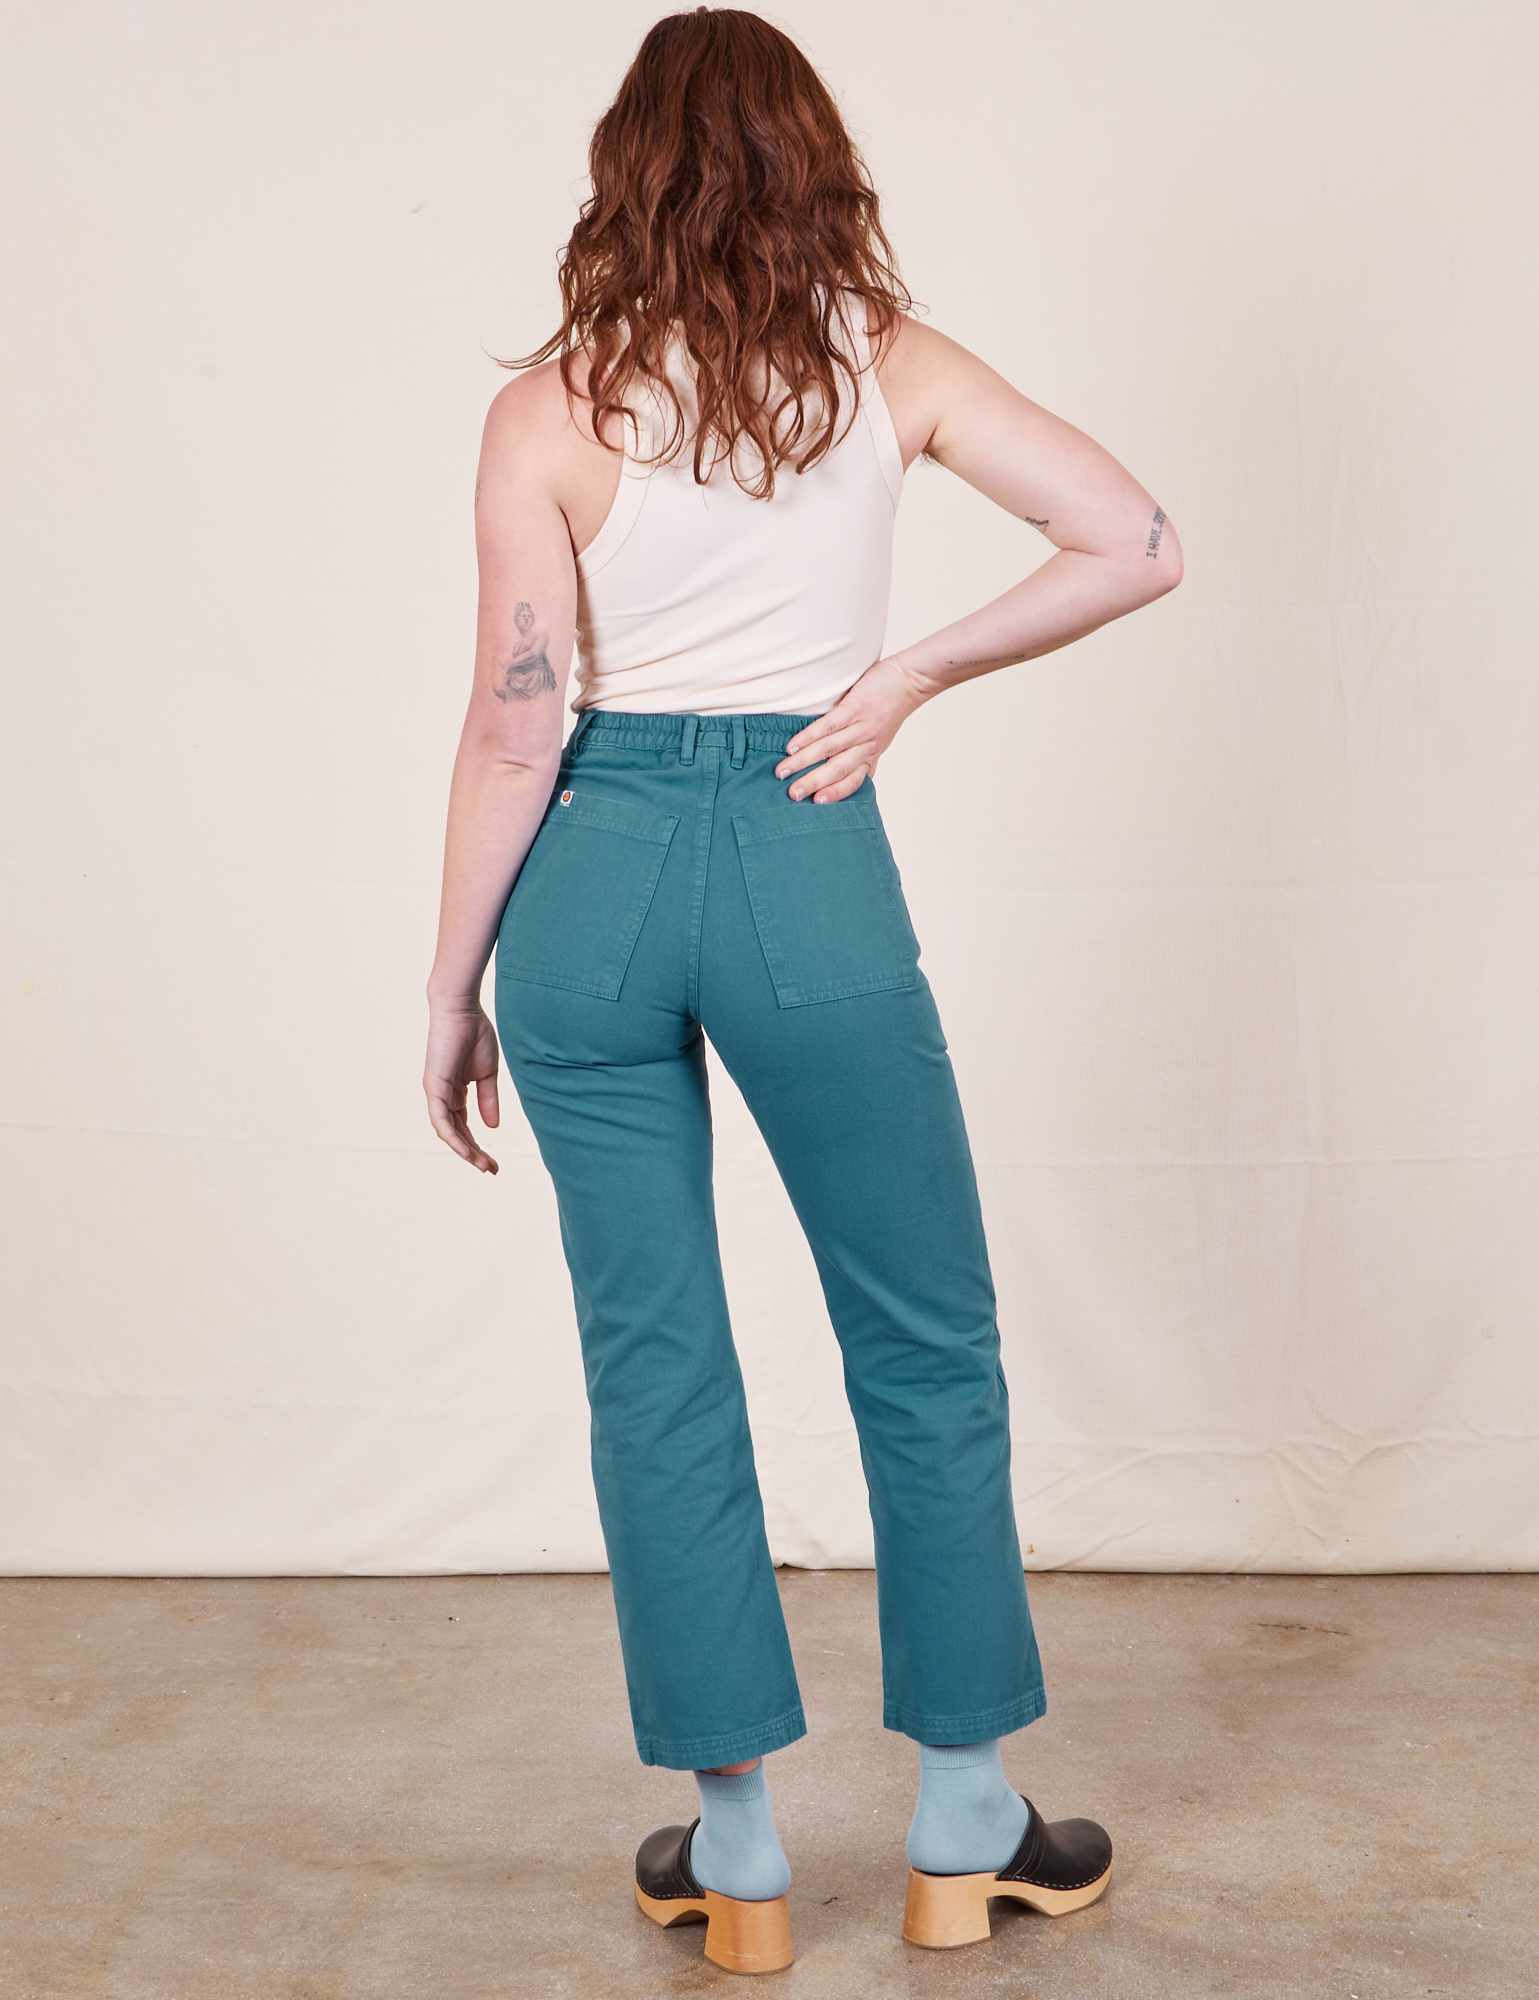 Work Pants in Marine Blue back view on Alex wearing vintage off-white Tank Top